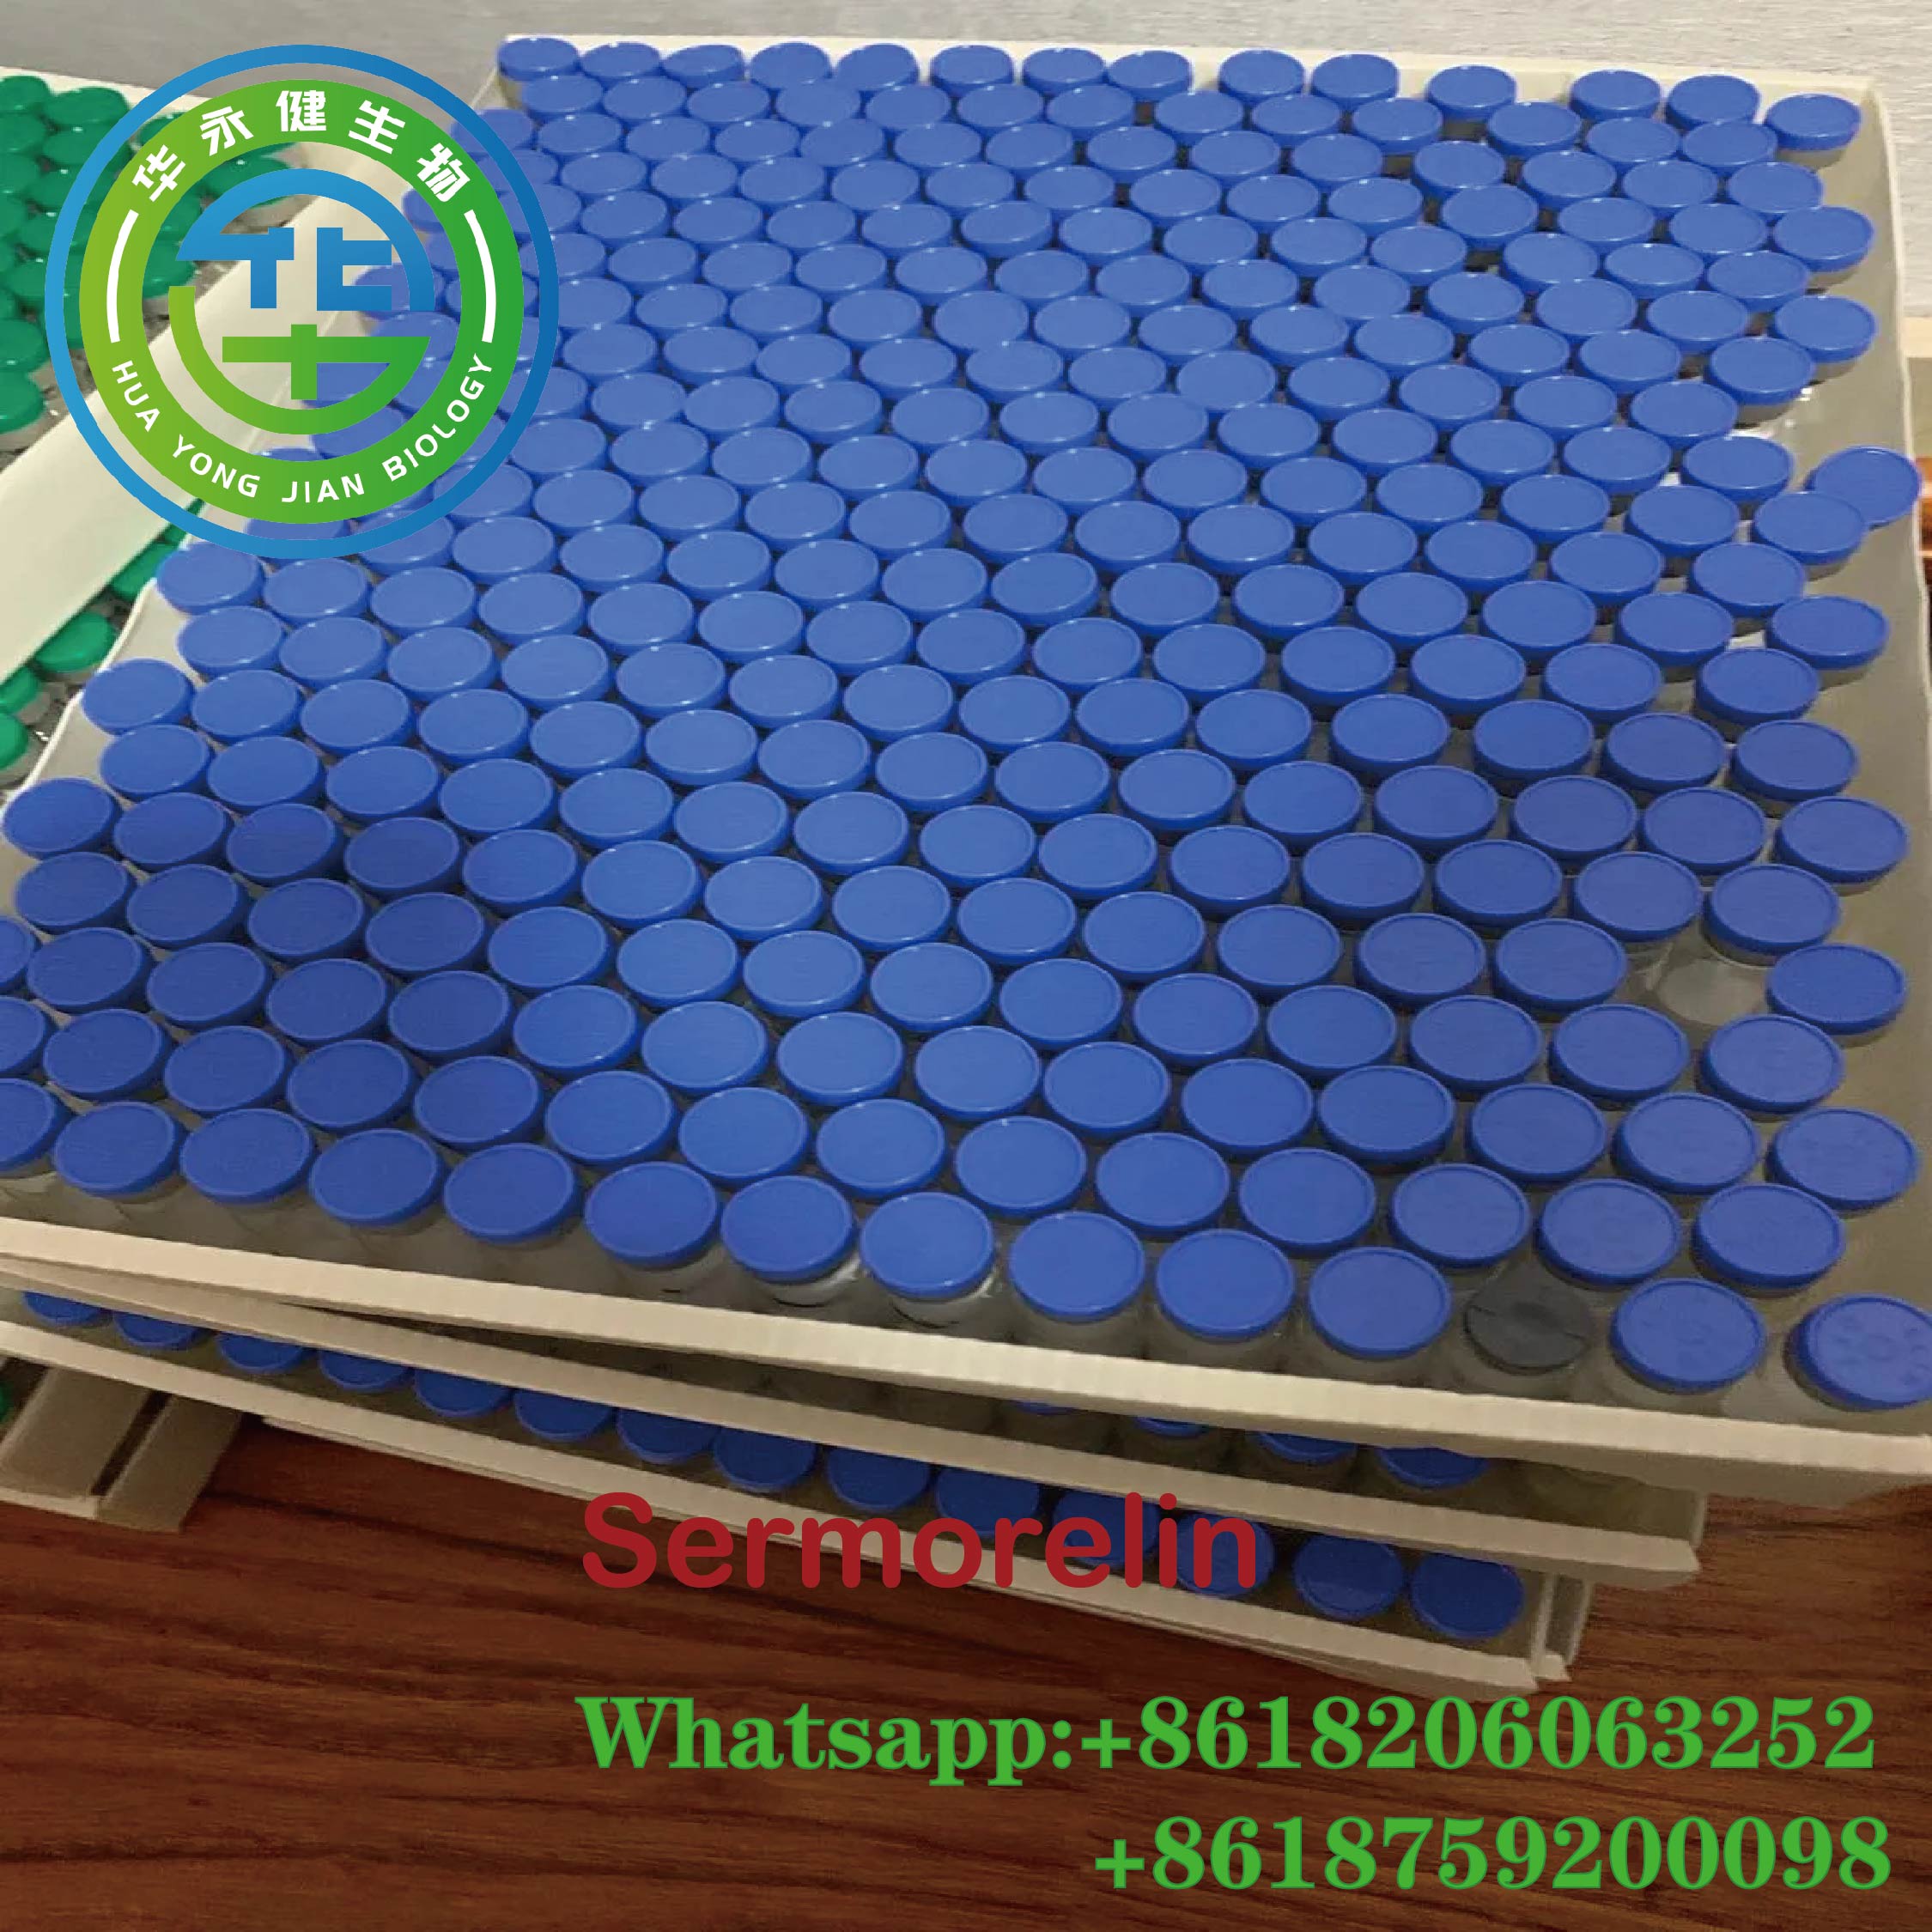 Synthetic Peptides Steroids Sermorelin GRF 1-29  For Improving Sleep